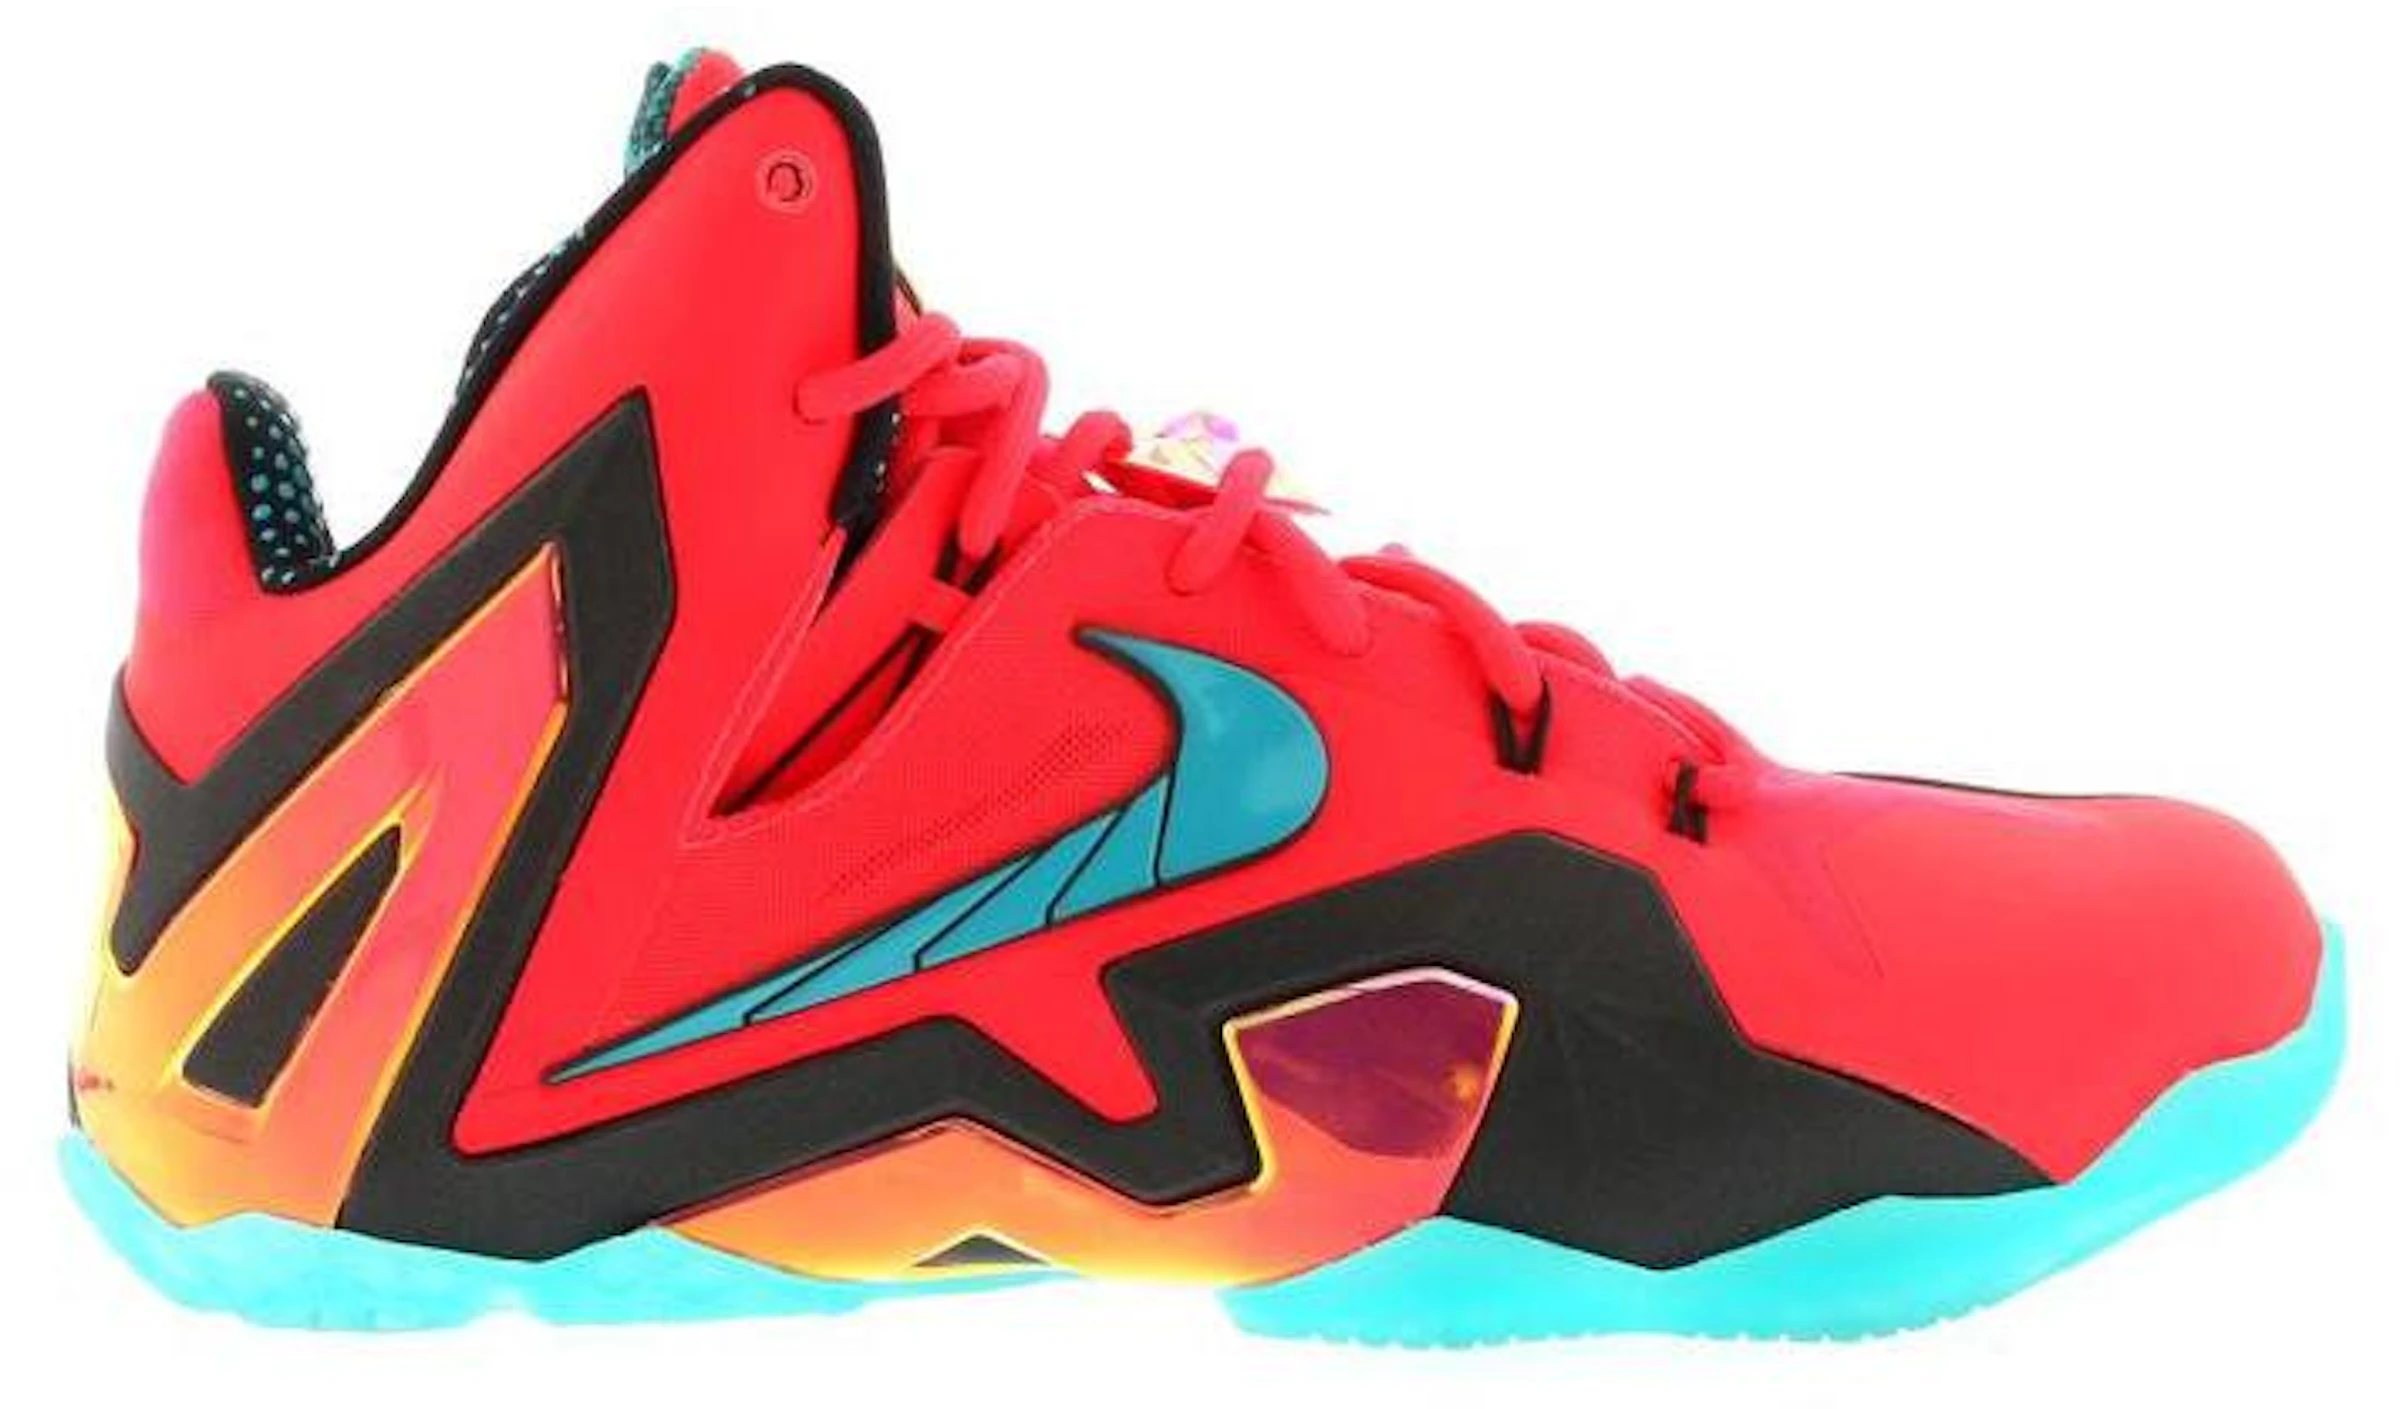 Buy Nike LeBron 11 Shoes & New Sneakers - StockX